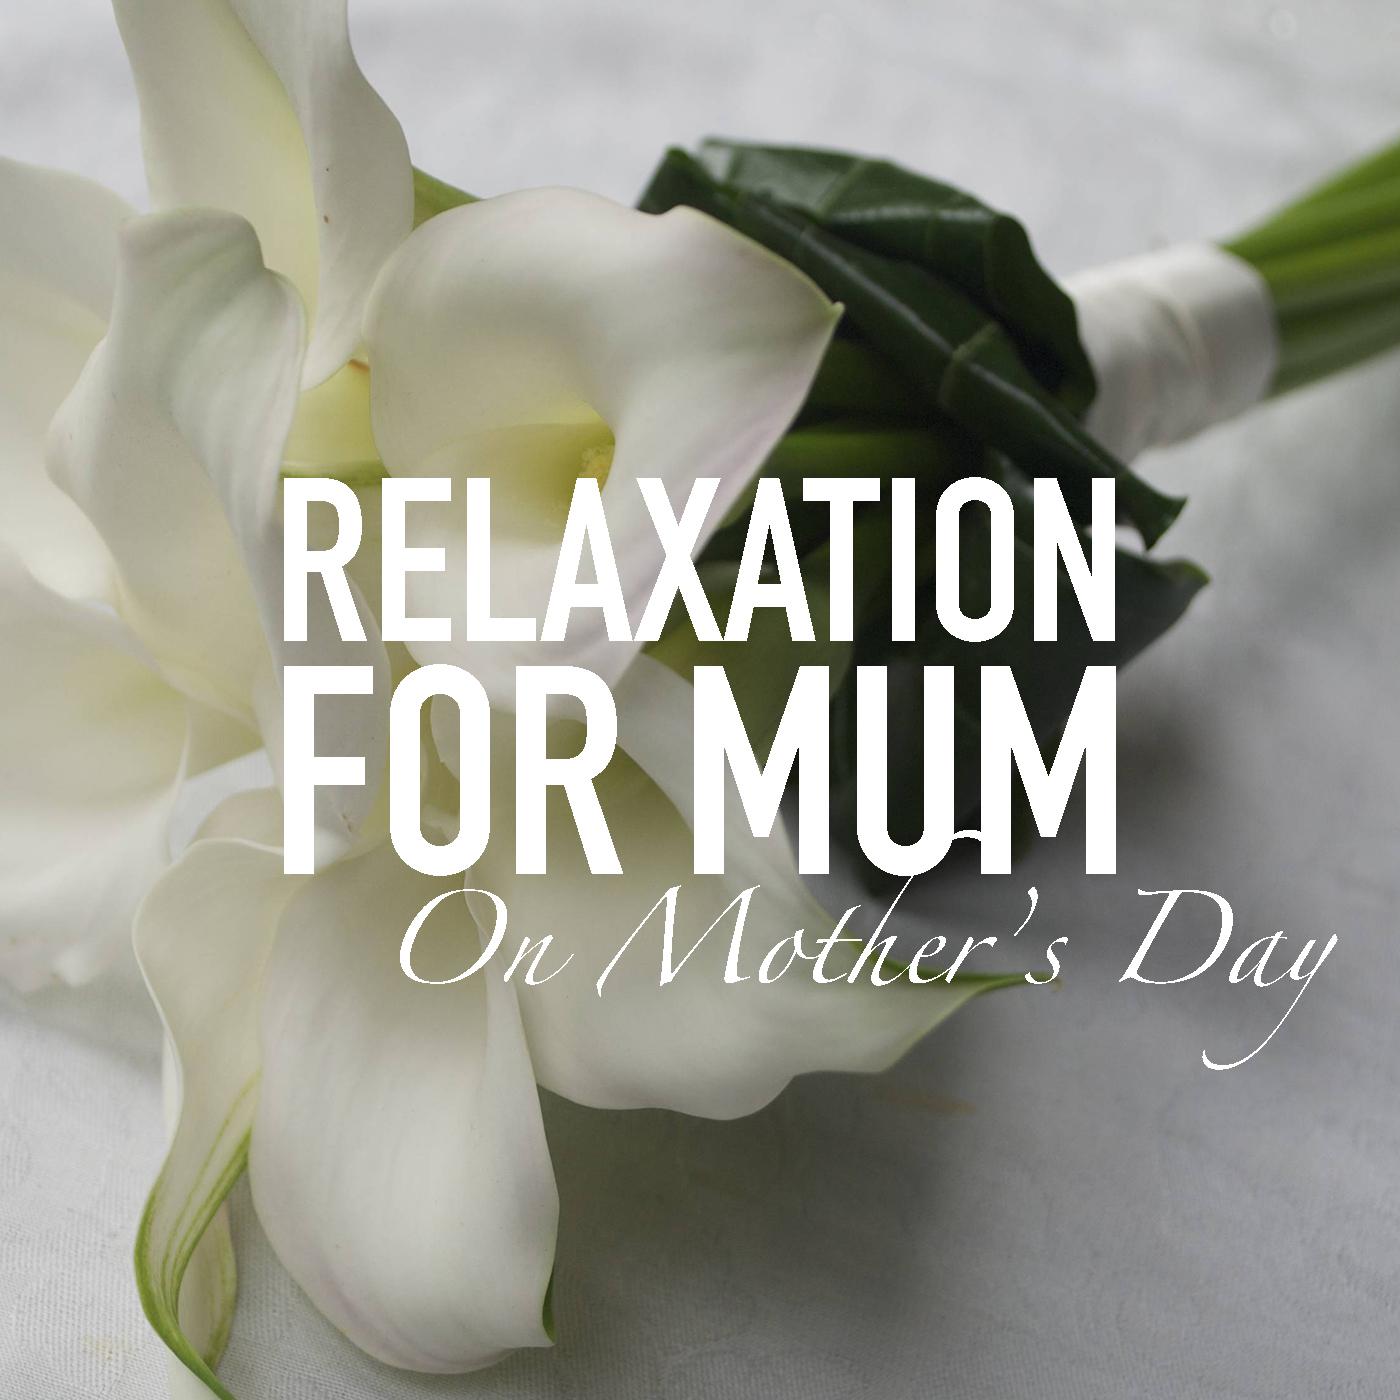 Relaxation For Mum On Mother's Day